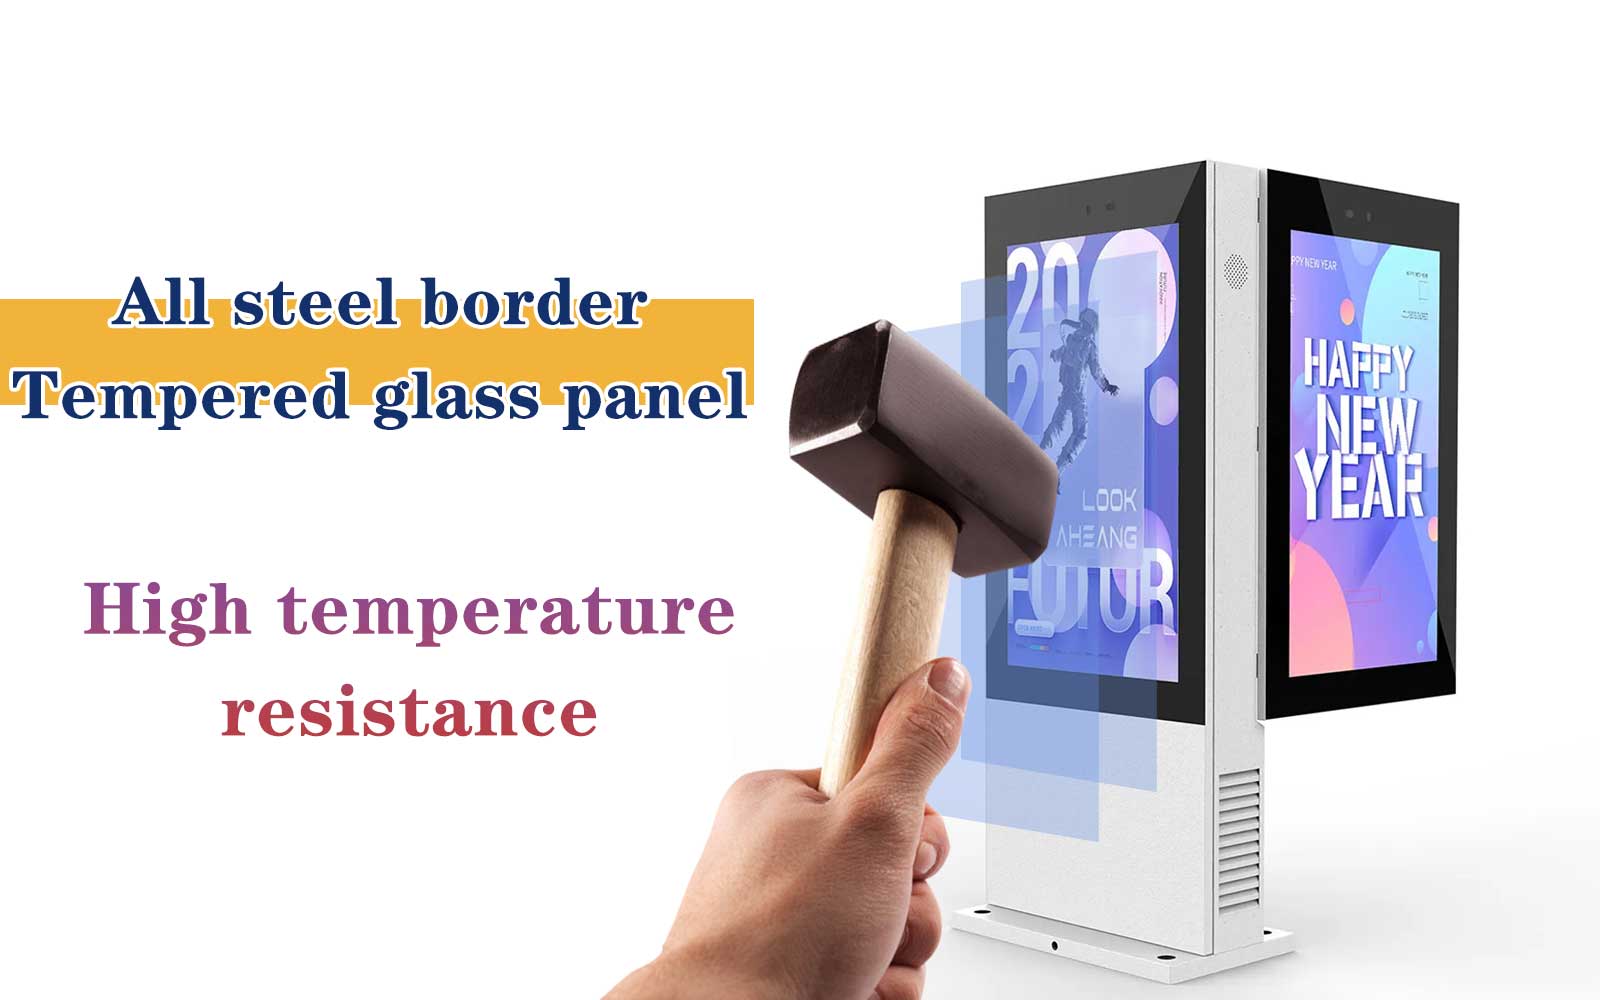 Outdoor double-sided digital signage